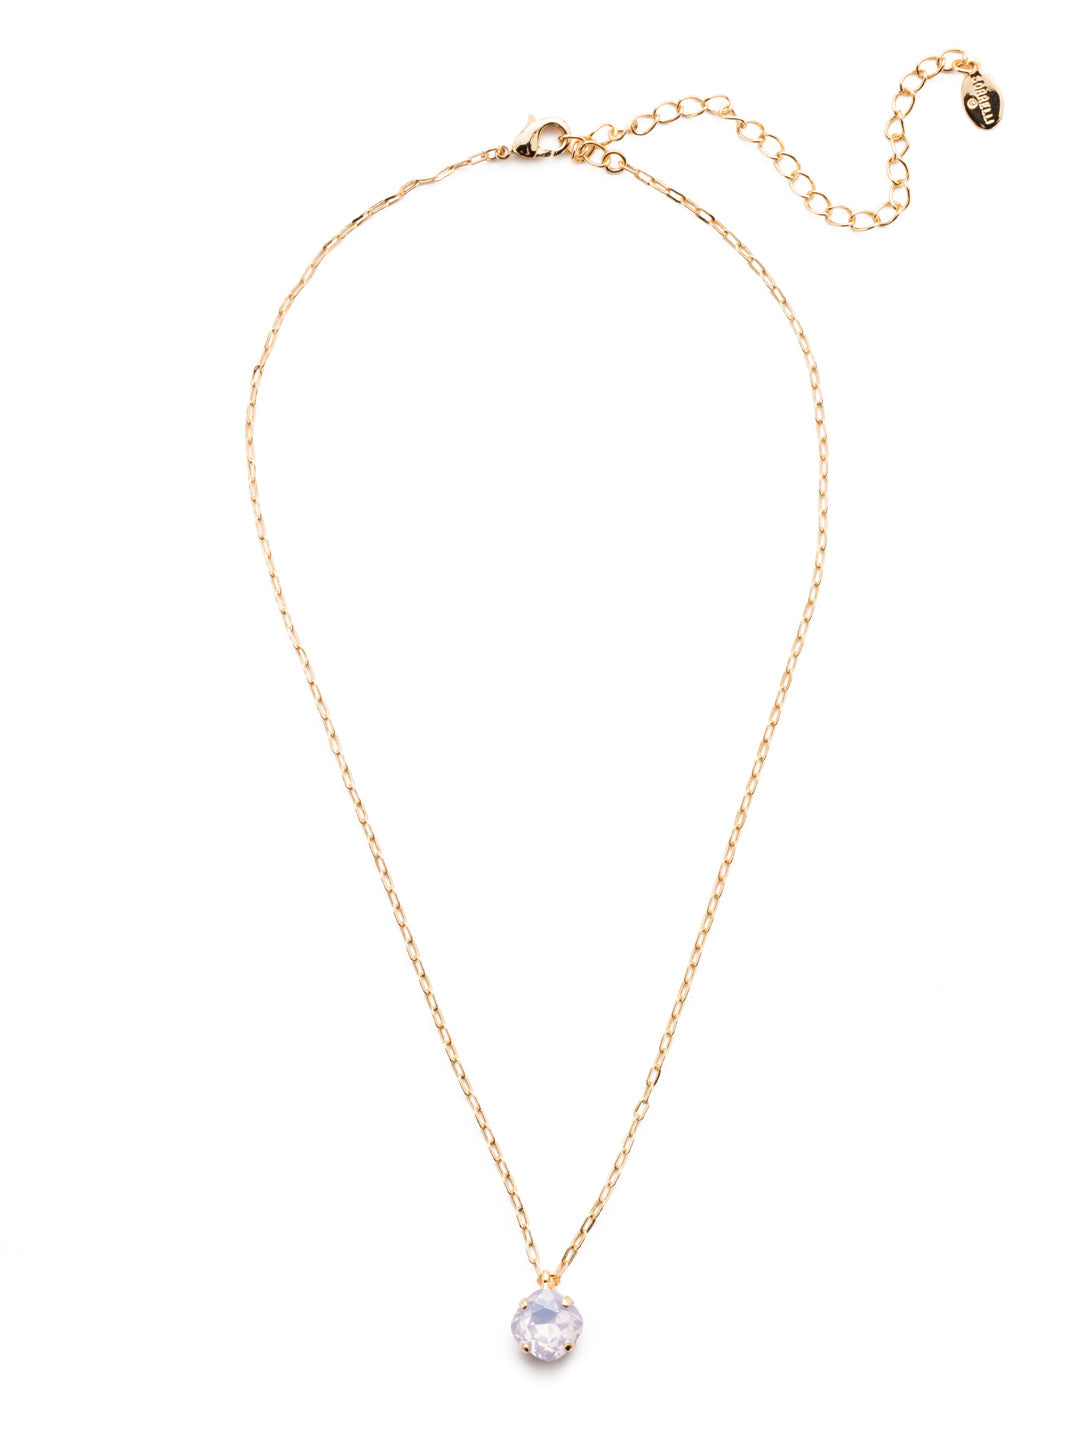 Siren Pendant Necklace - NEP22BGROW - With a cushion-cut crystal and delicate chain, the Siren Pendant  will add a litle sparkle to your everyday look. From Sorrelli's Rose Water collection in our Bright Gold-tone finish.